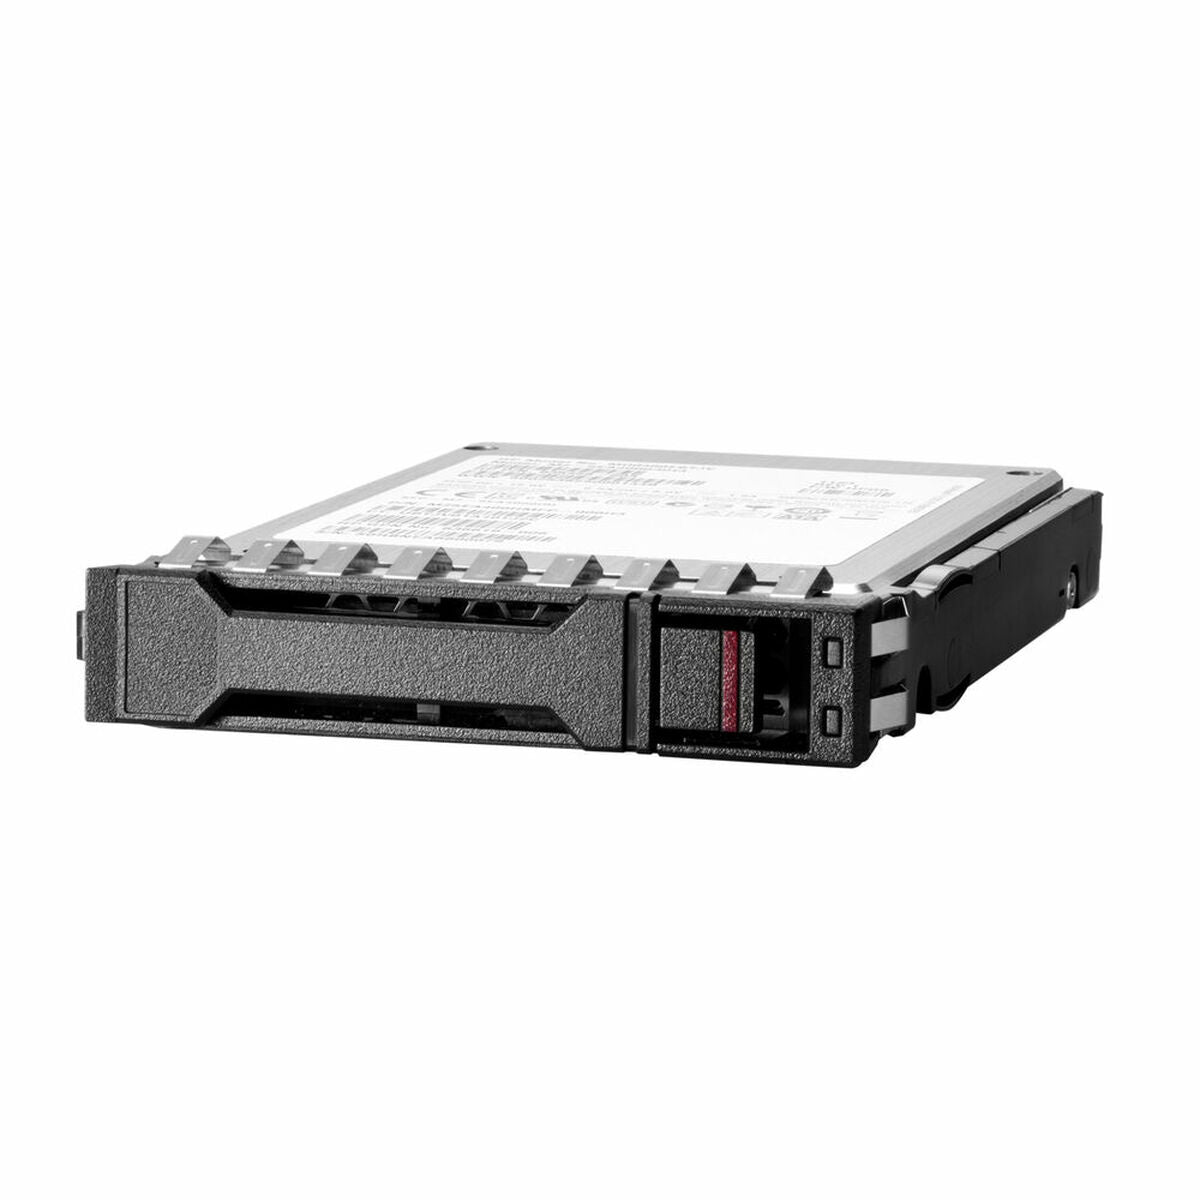 Hard Drive HPE P28610-B21 1 TB, HPE, Computing, Data storage, hard-drive-hpe-p28610-b21-1-tb, Brand_HPE, category-reference-2609, category-reference-2803, category-reference-2806, category-reference-t-19685, category-reference-t-19909, category-reference-t-21357, computers / components, Condition_NEW, Price_500 - 600, Teleworking, RiotNook